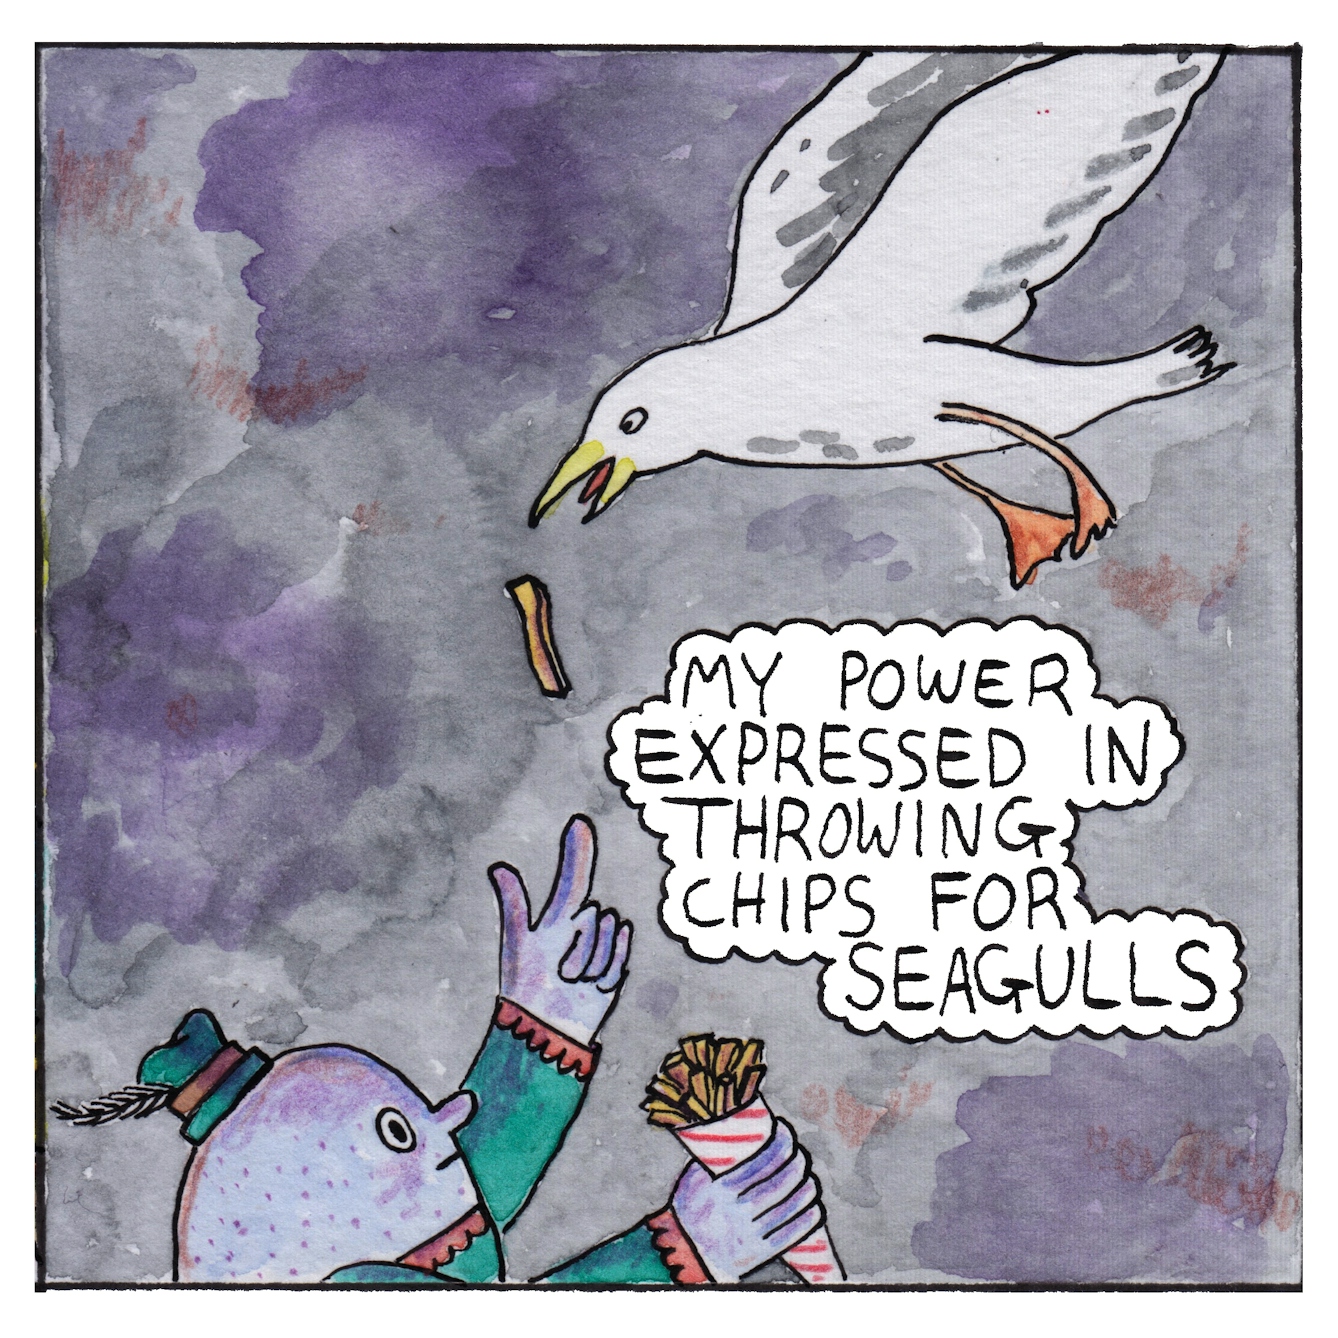 Panel 8 of the comic 'Egg Inc.': An egg-shaped character dressed in green with a green had holds a bag of chips (fries) in one hand as it throws a single chip up in the air with the other. A large white seagull flies down to catch the chip in its beak. The text bubble says "My power expressed in throwing chips for seagulls".